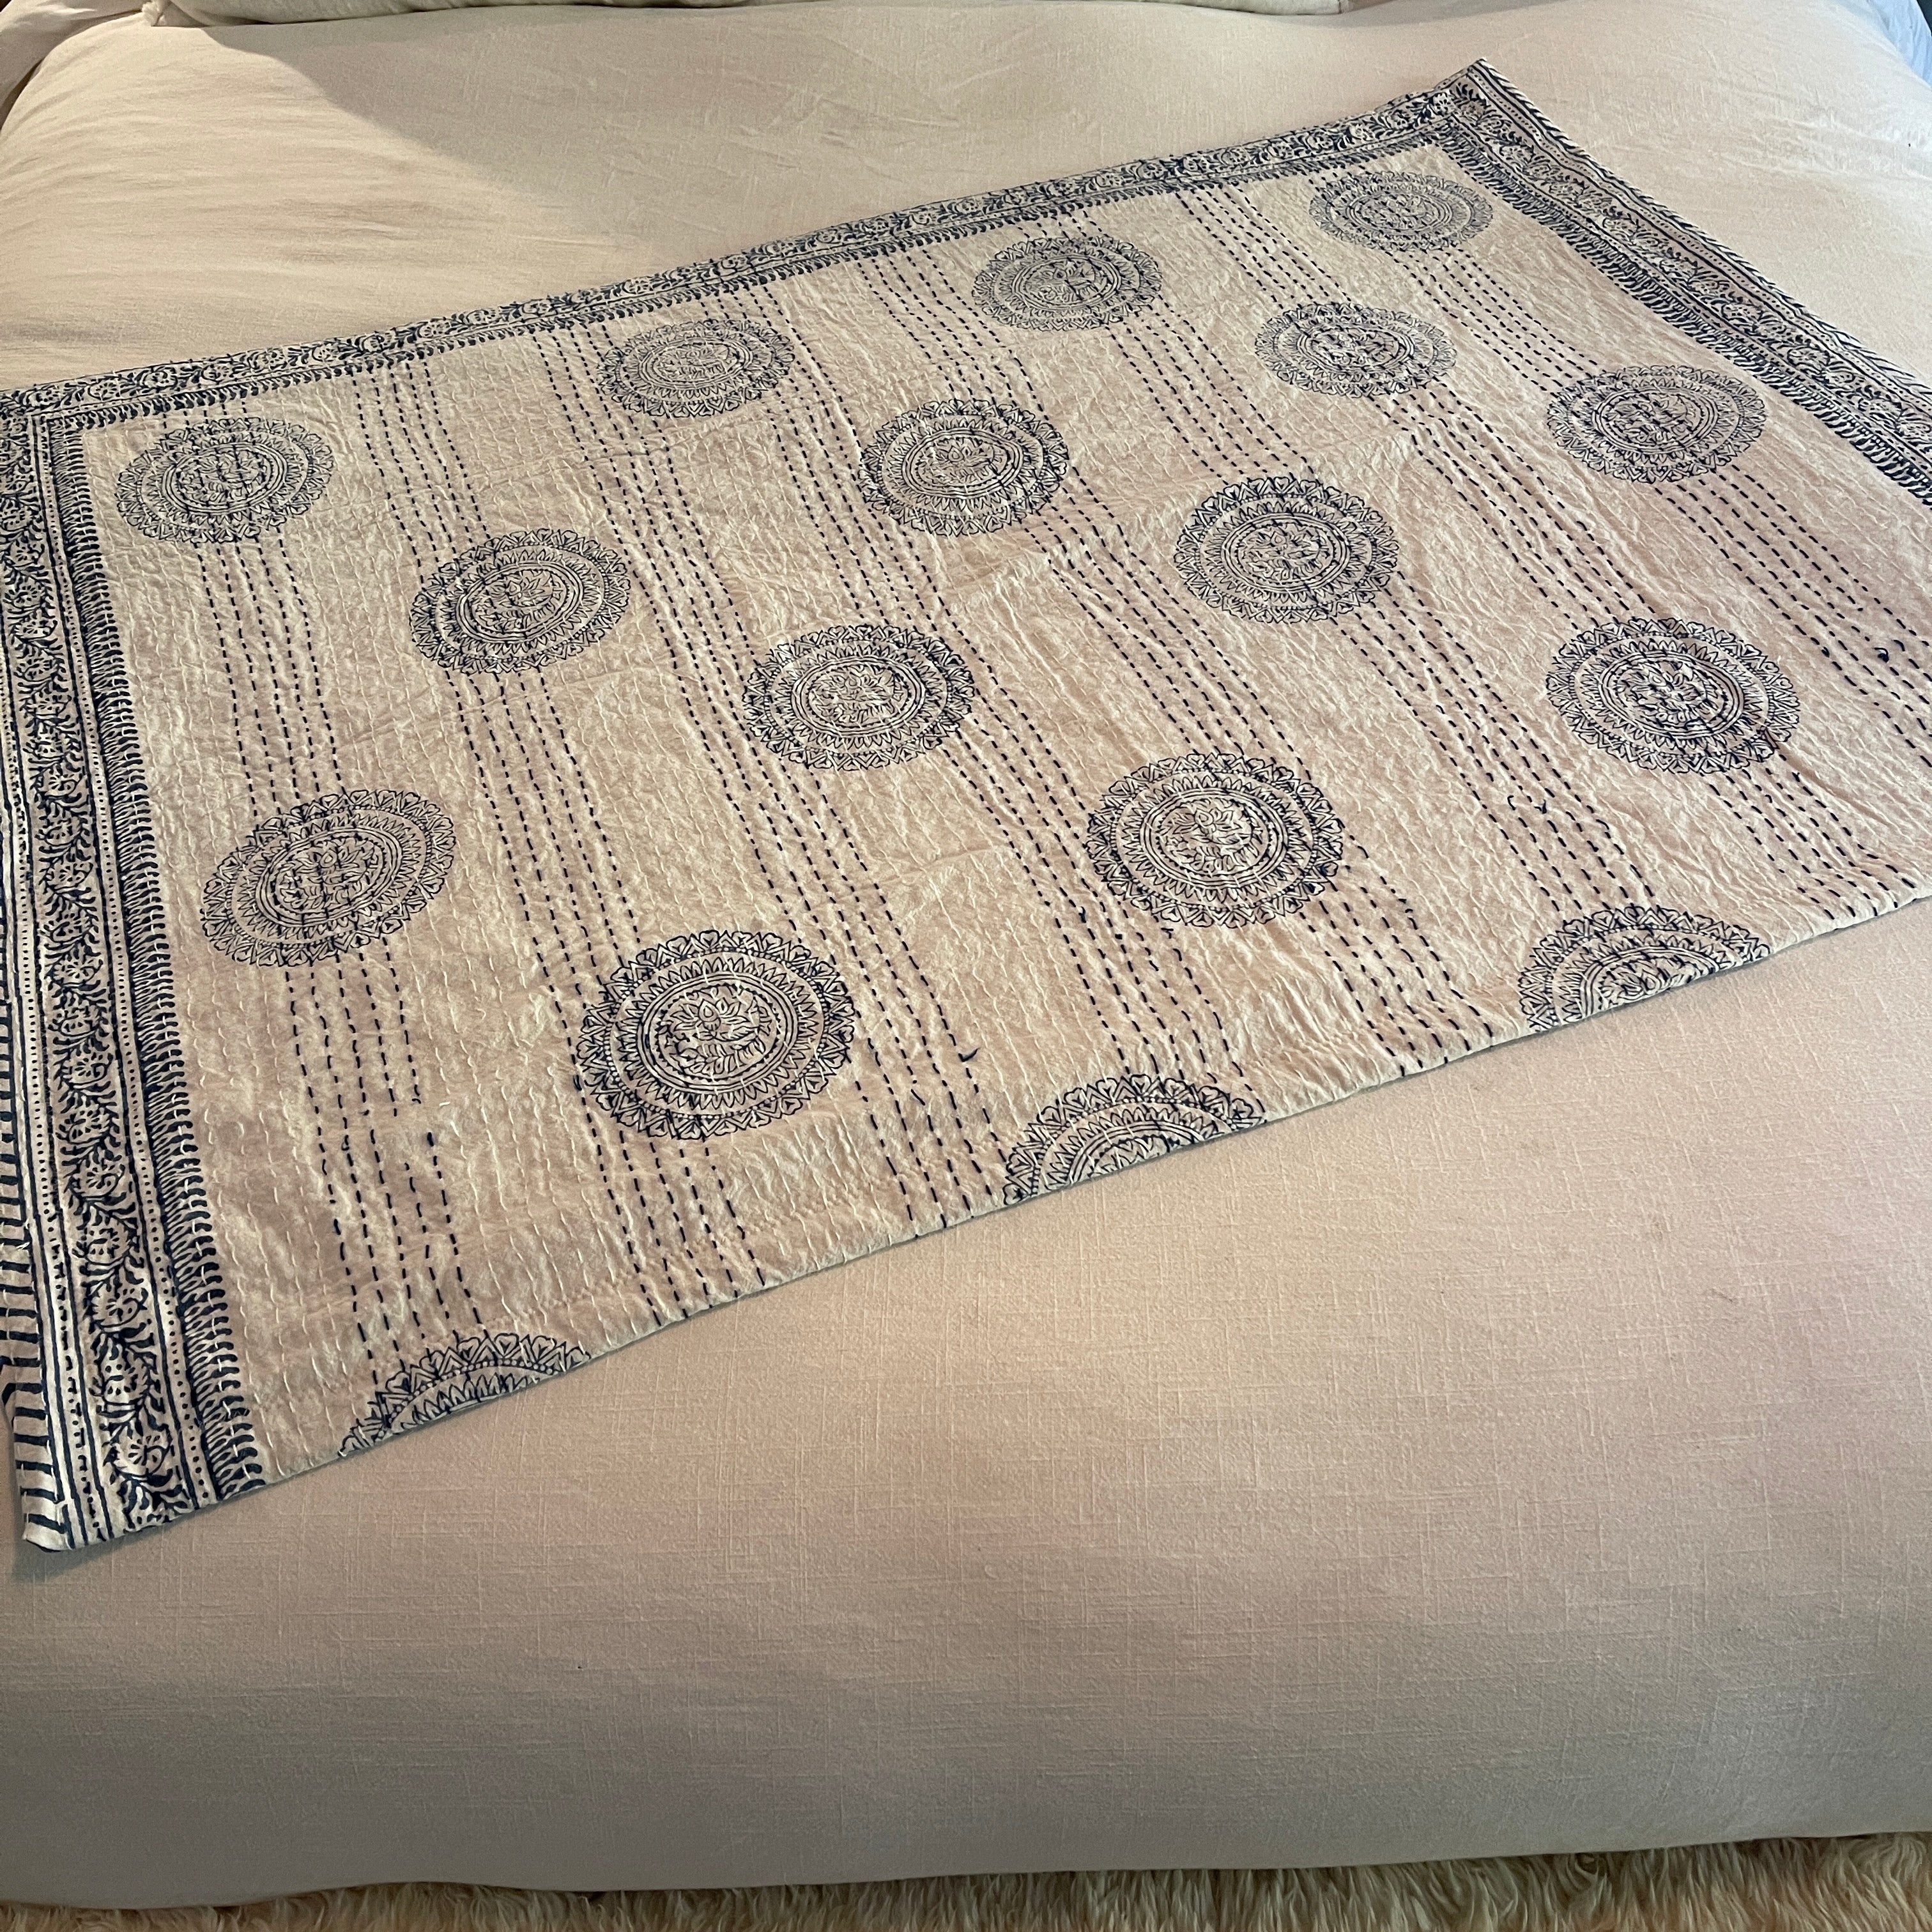 Mini New Kantha Quilt with Minky Faux-Fur - White